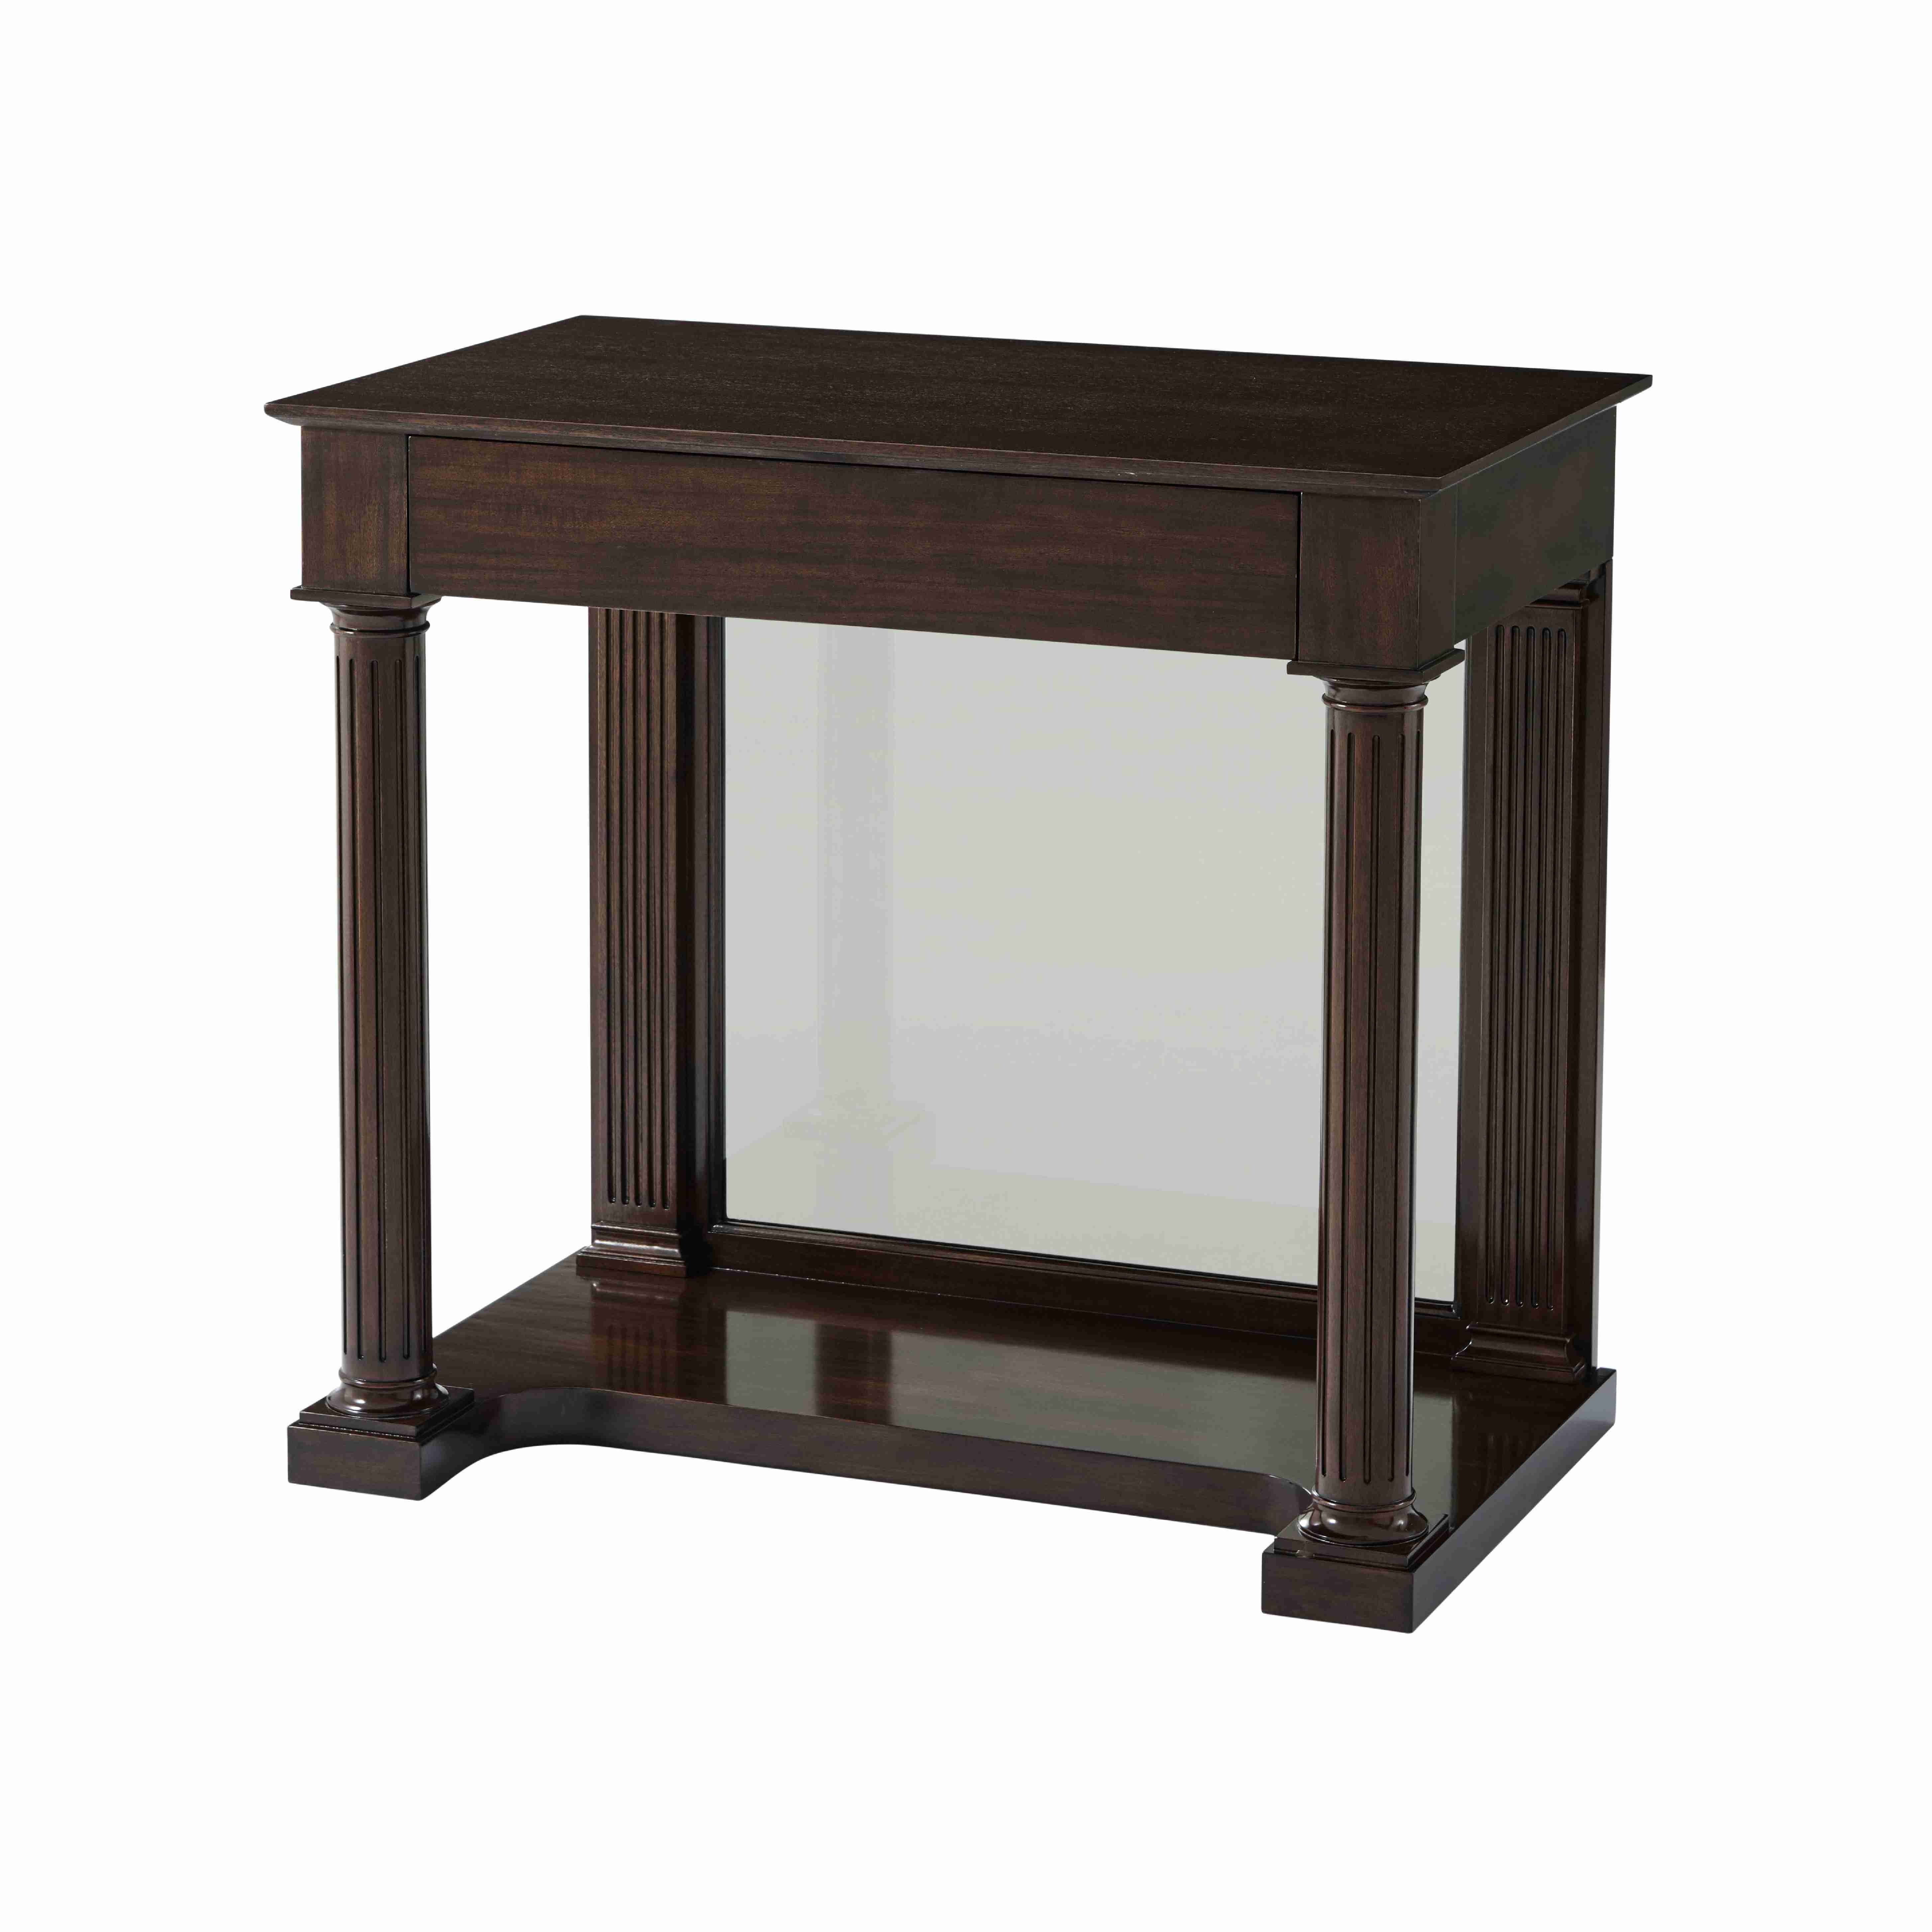 LINDSAY CONSOLE TABLE